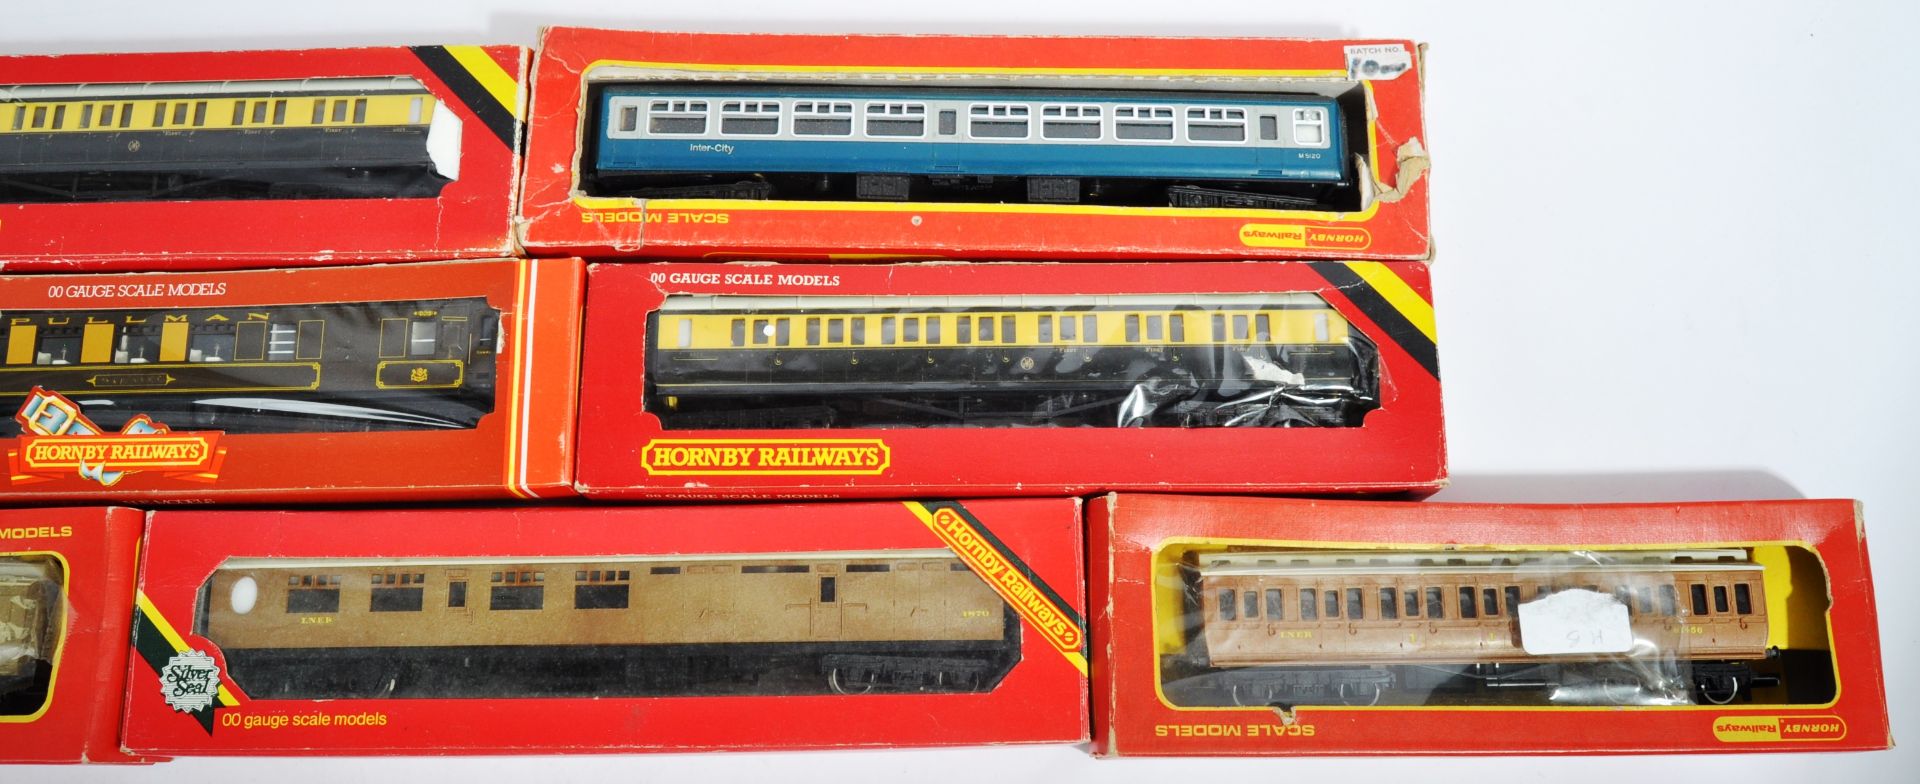 COLLECTION OF HORNBY 00 GAUGE MODEL RAILWAY CARRIAGES - Image 4 of 4